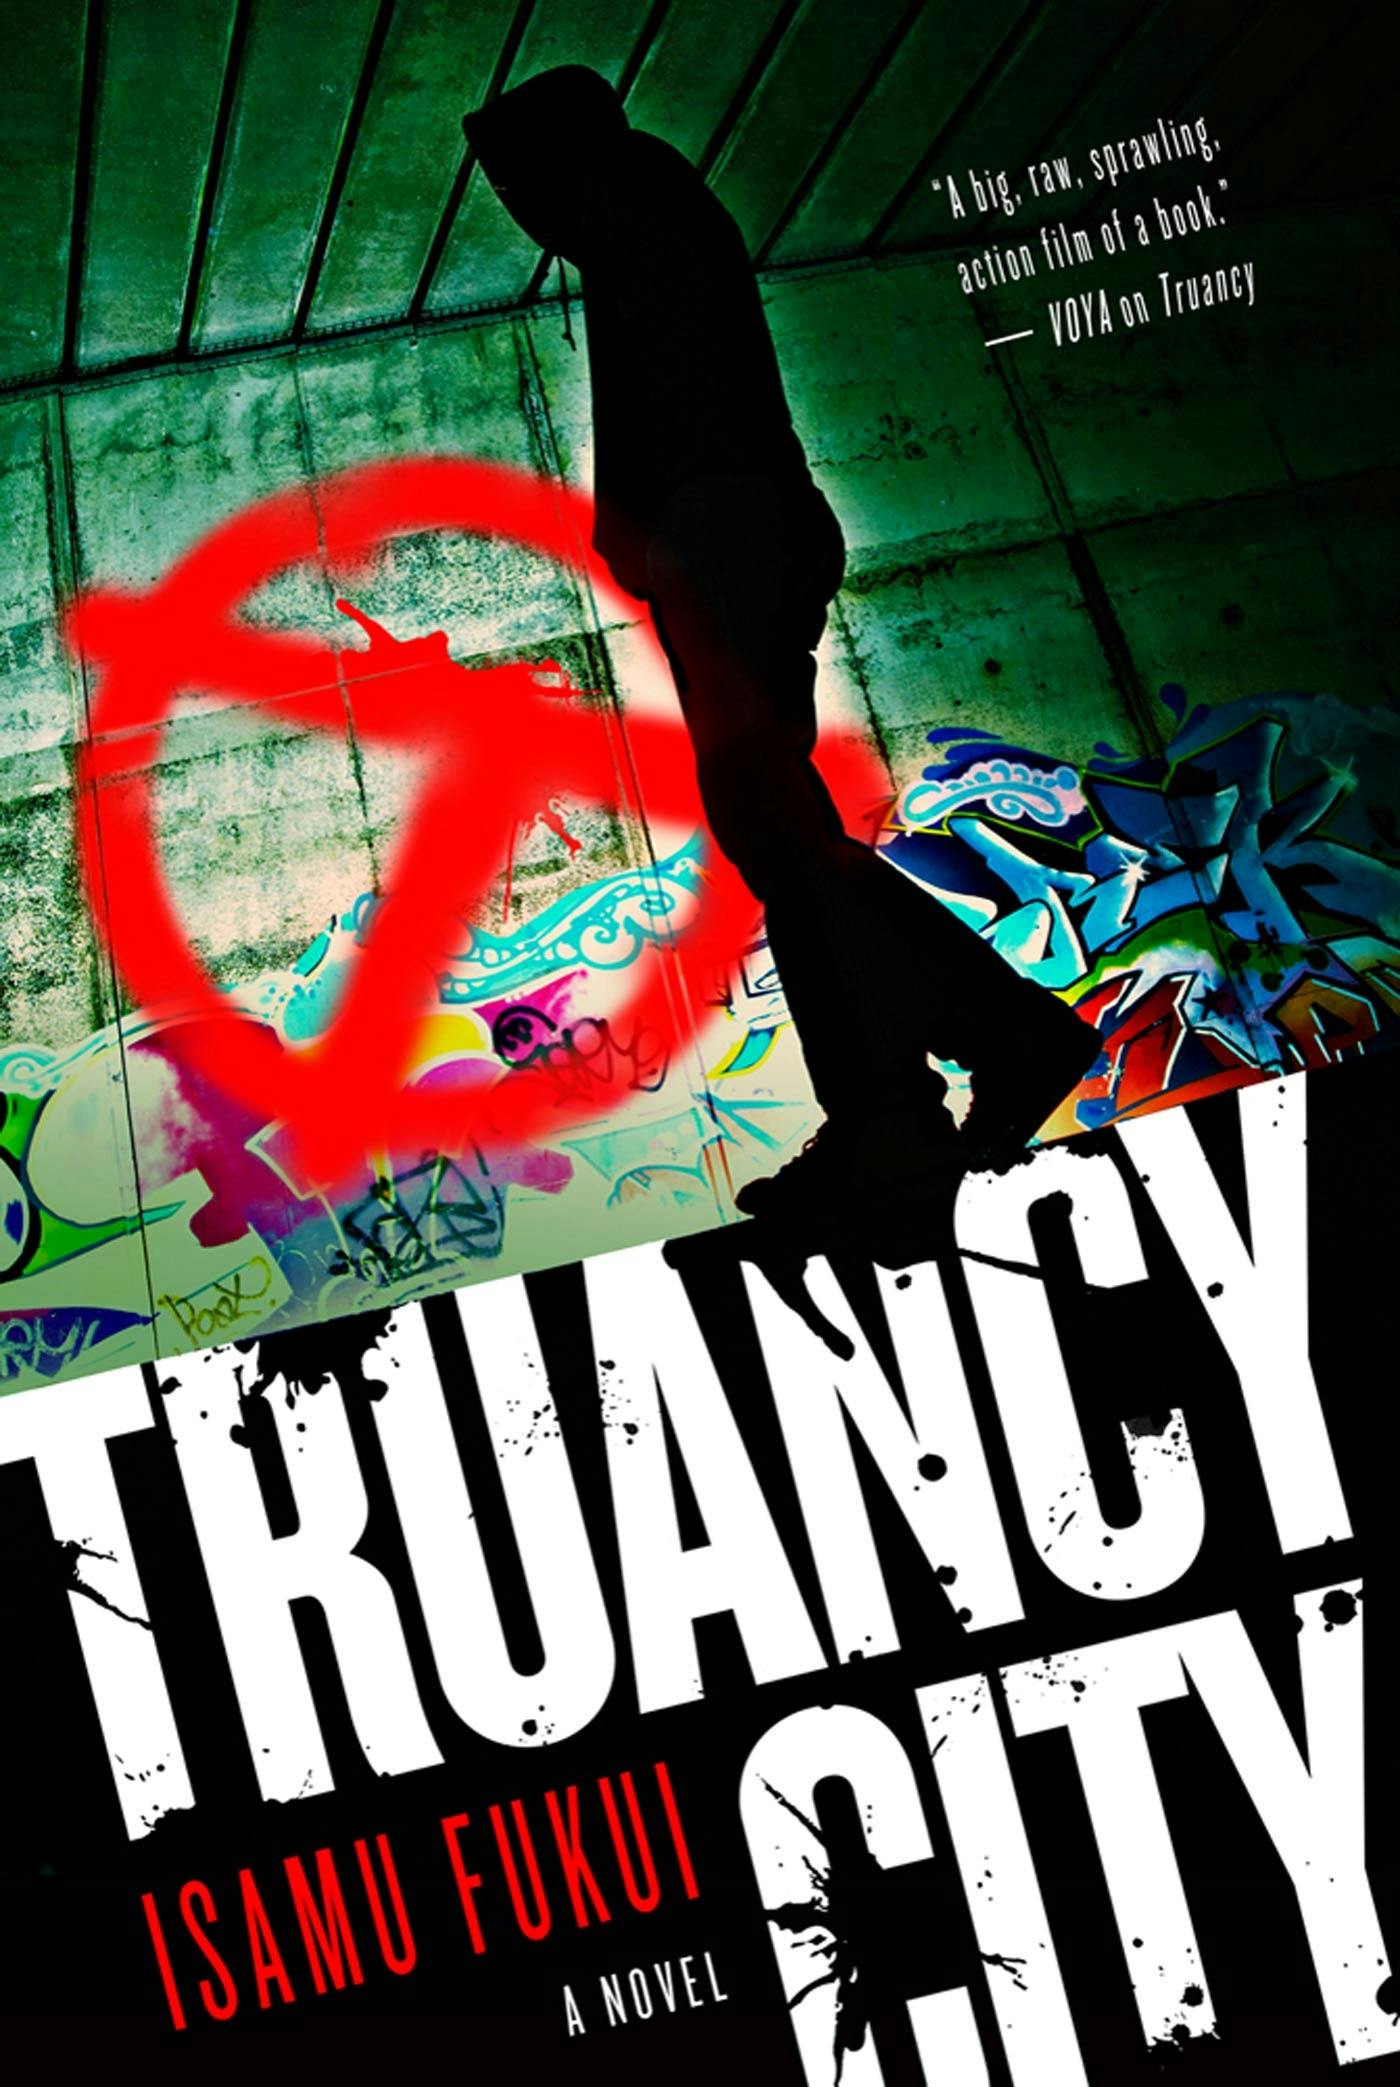 Cover for the book titled as: Truancy City